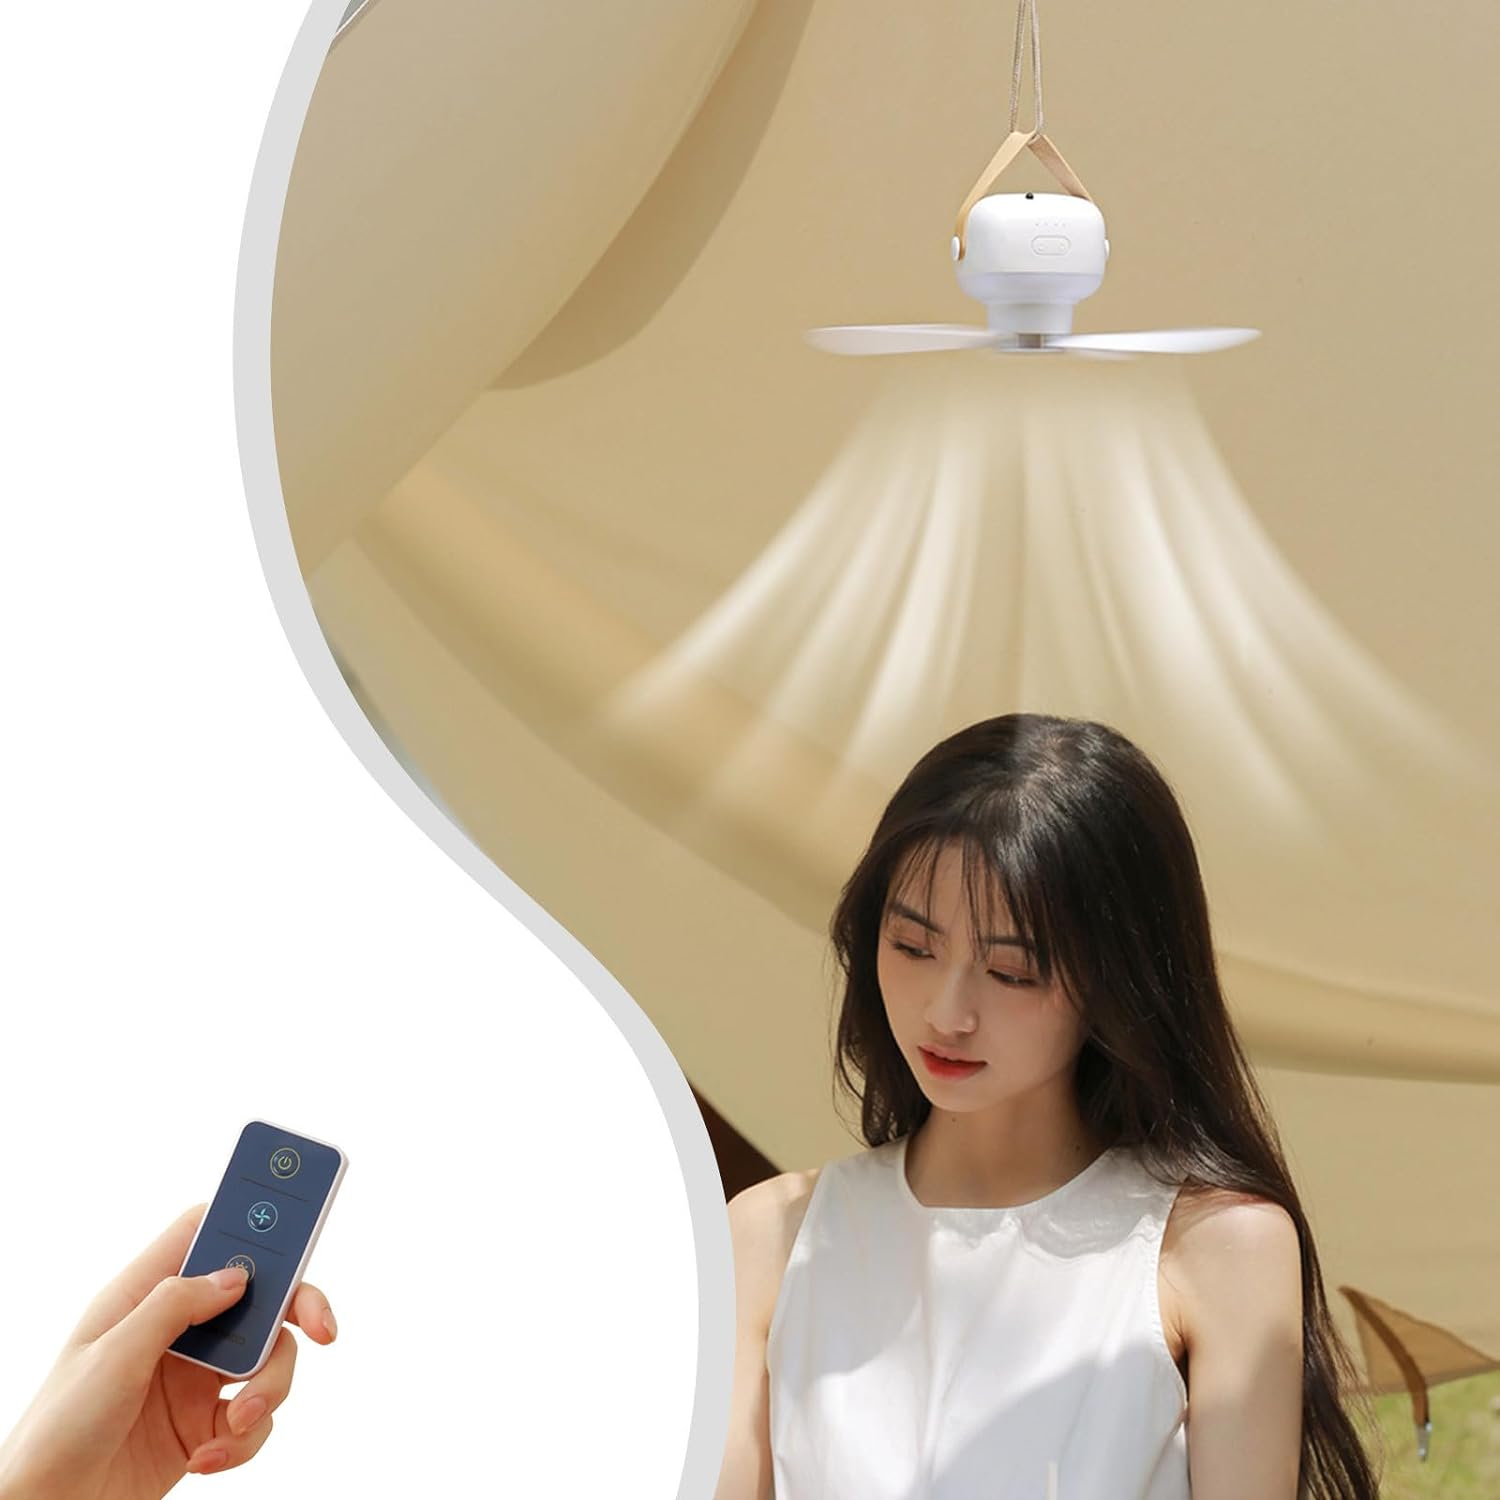 Portable Hanging Fan With Night Light - Home Essentials Store